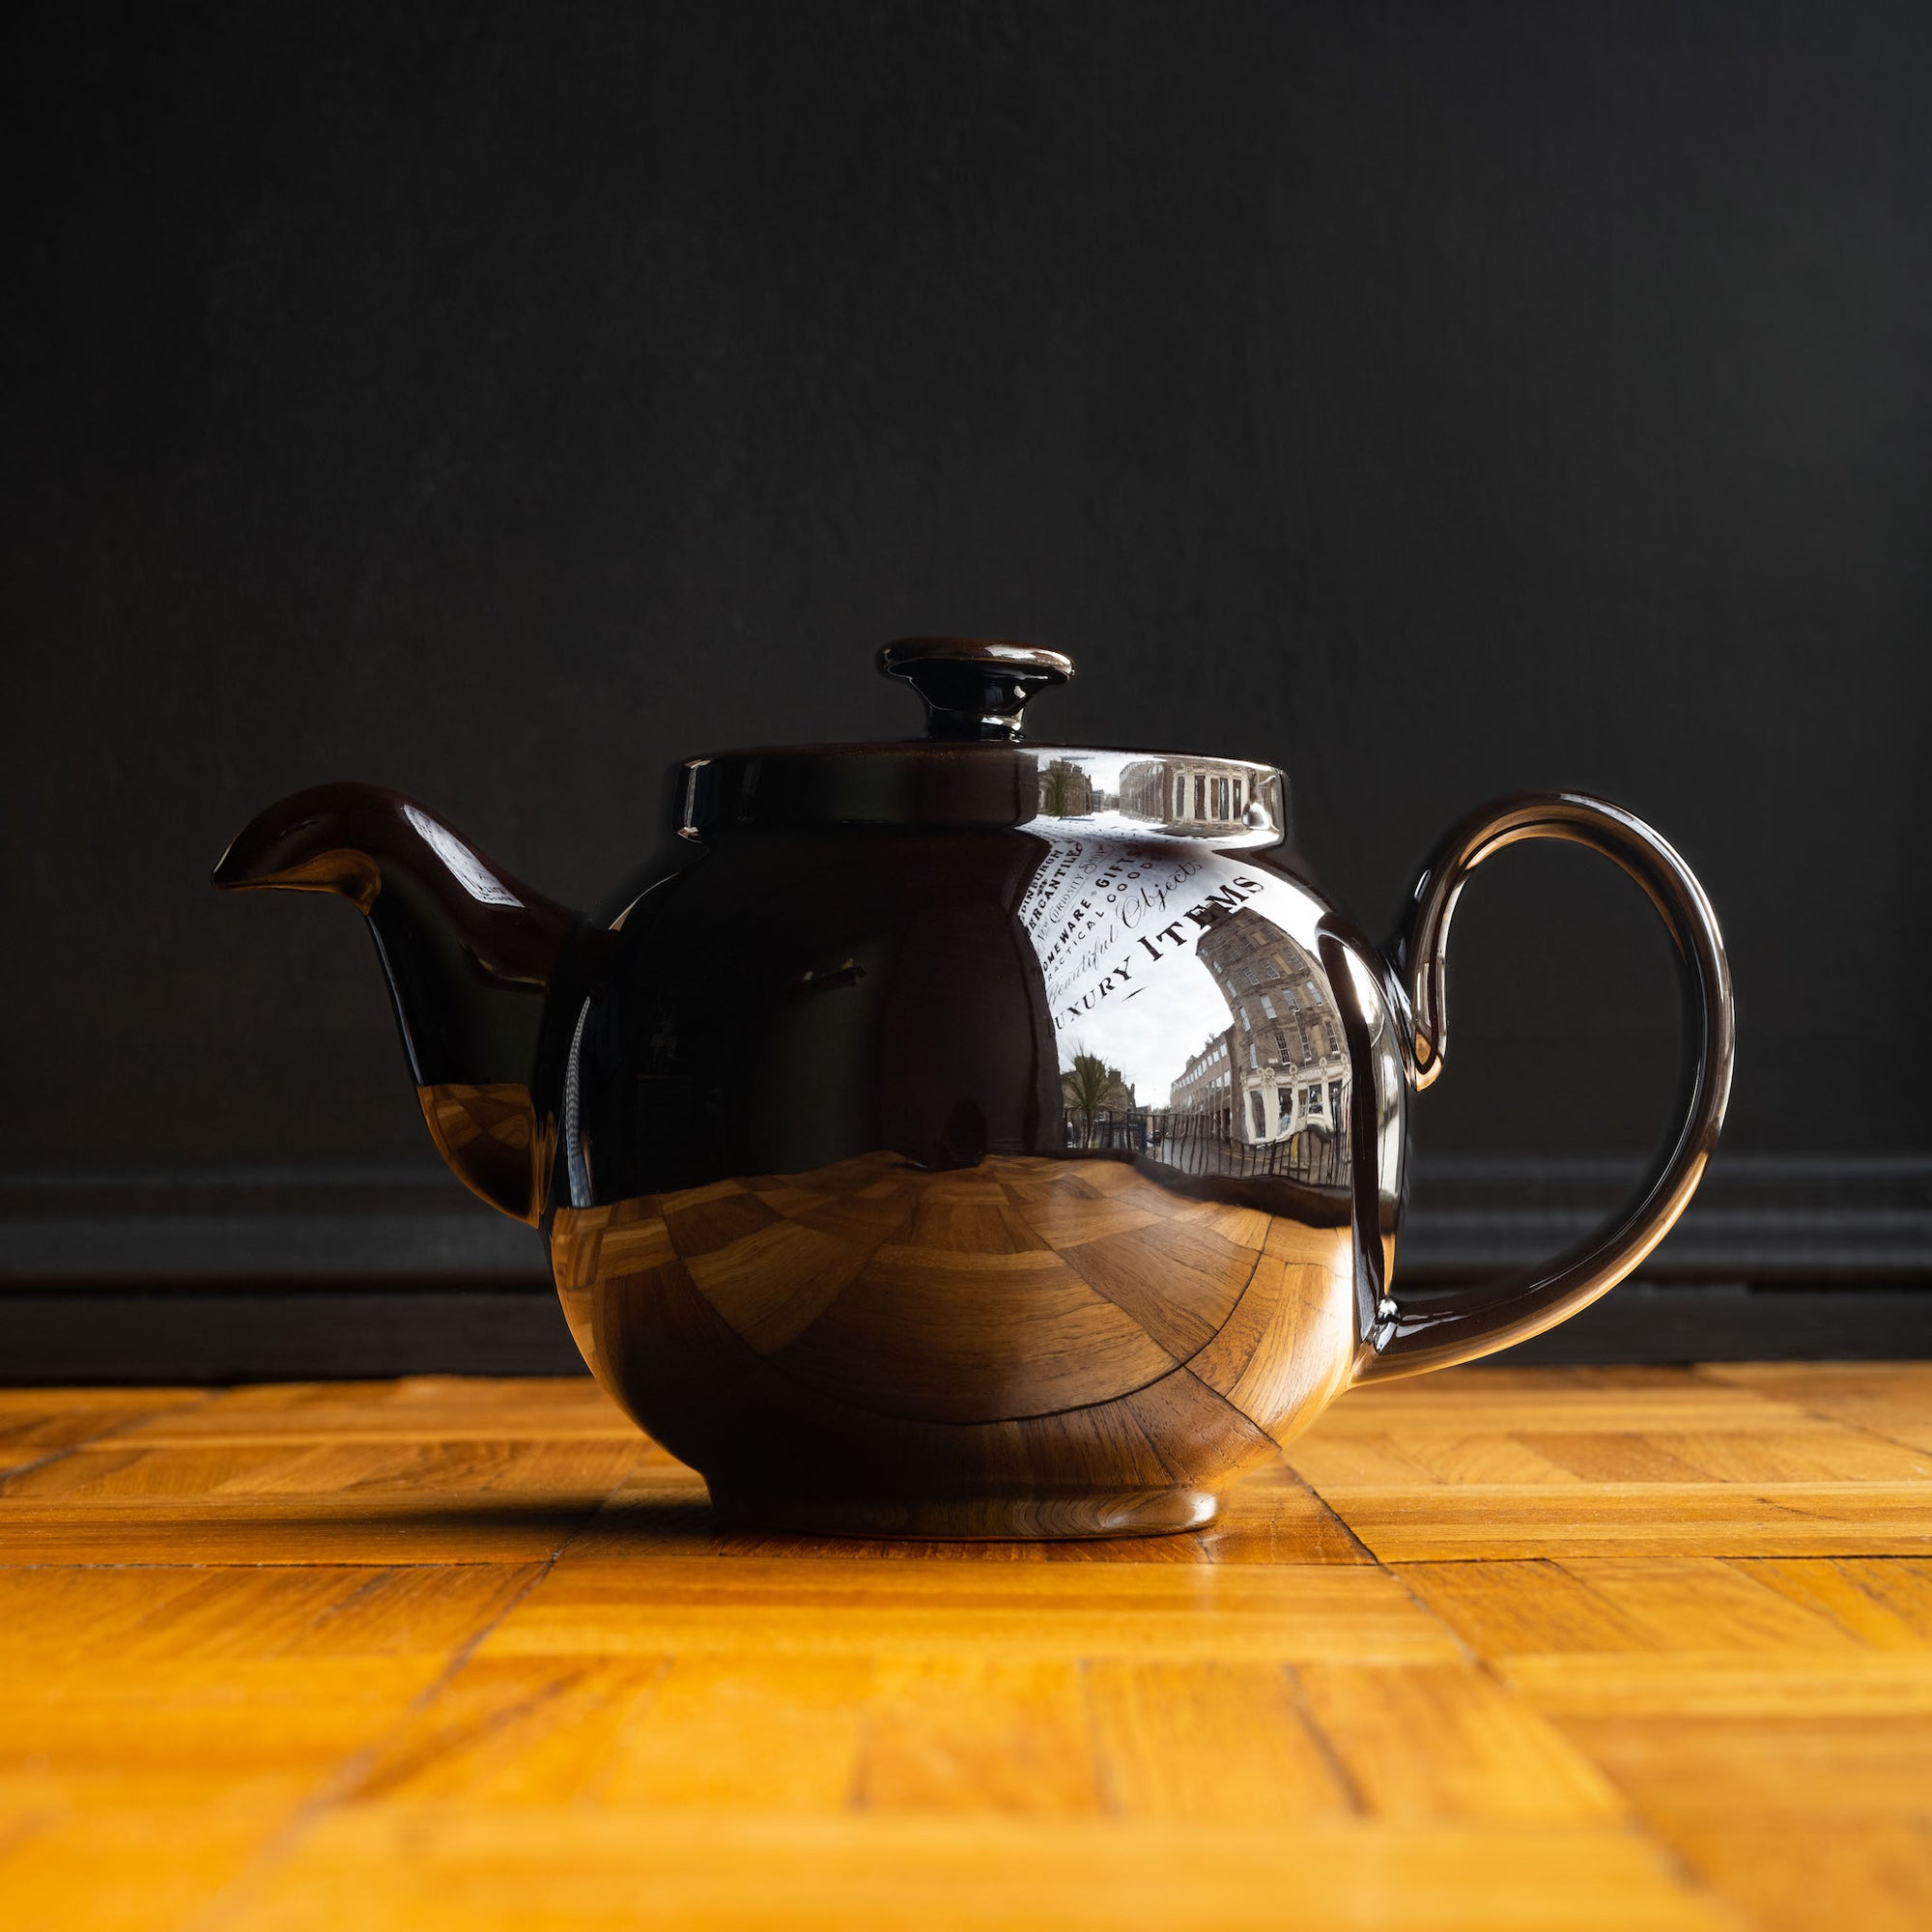 Re-engineered Brown Betty teapot by Ian McIntyre